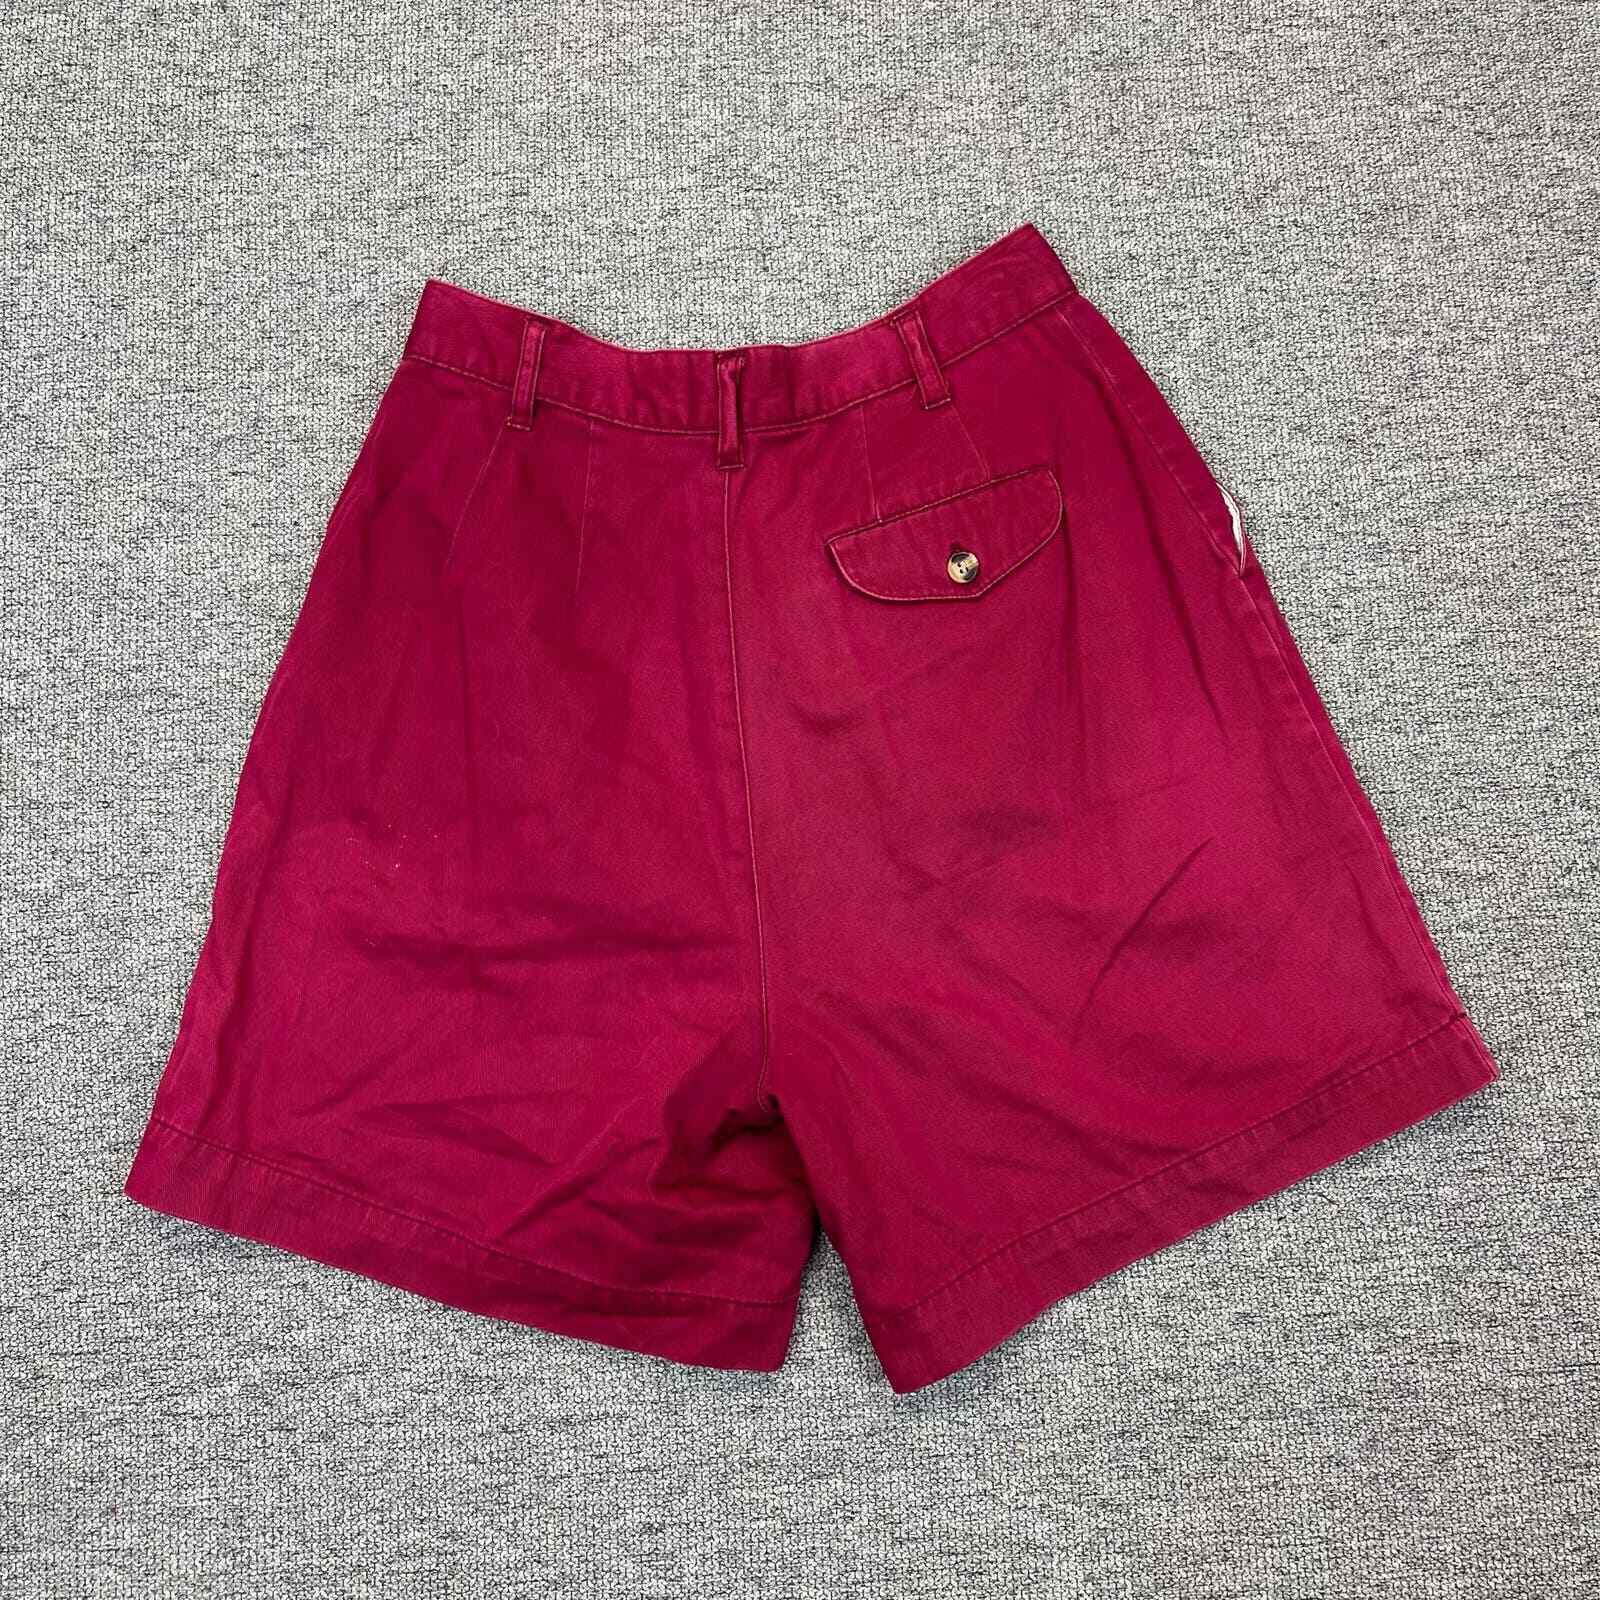 Vintage Red Rover Pleated Fuchsia Jean Shorts Wom… - image 3